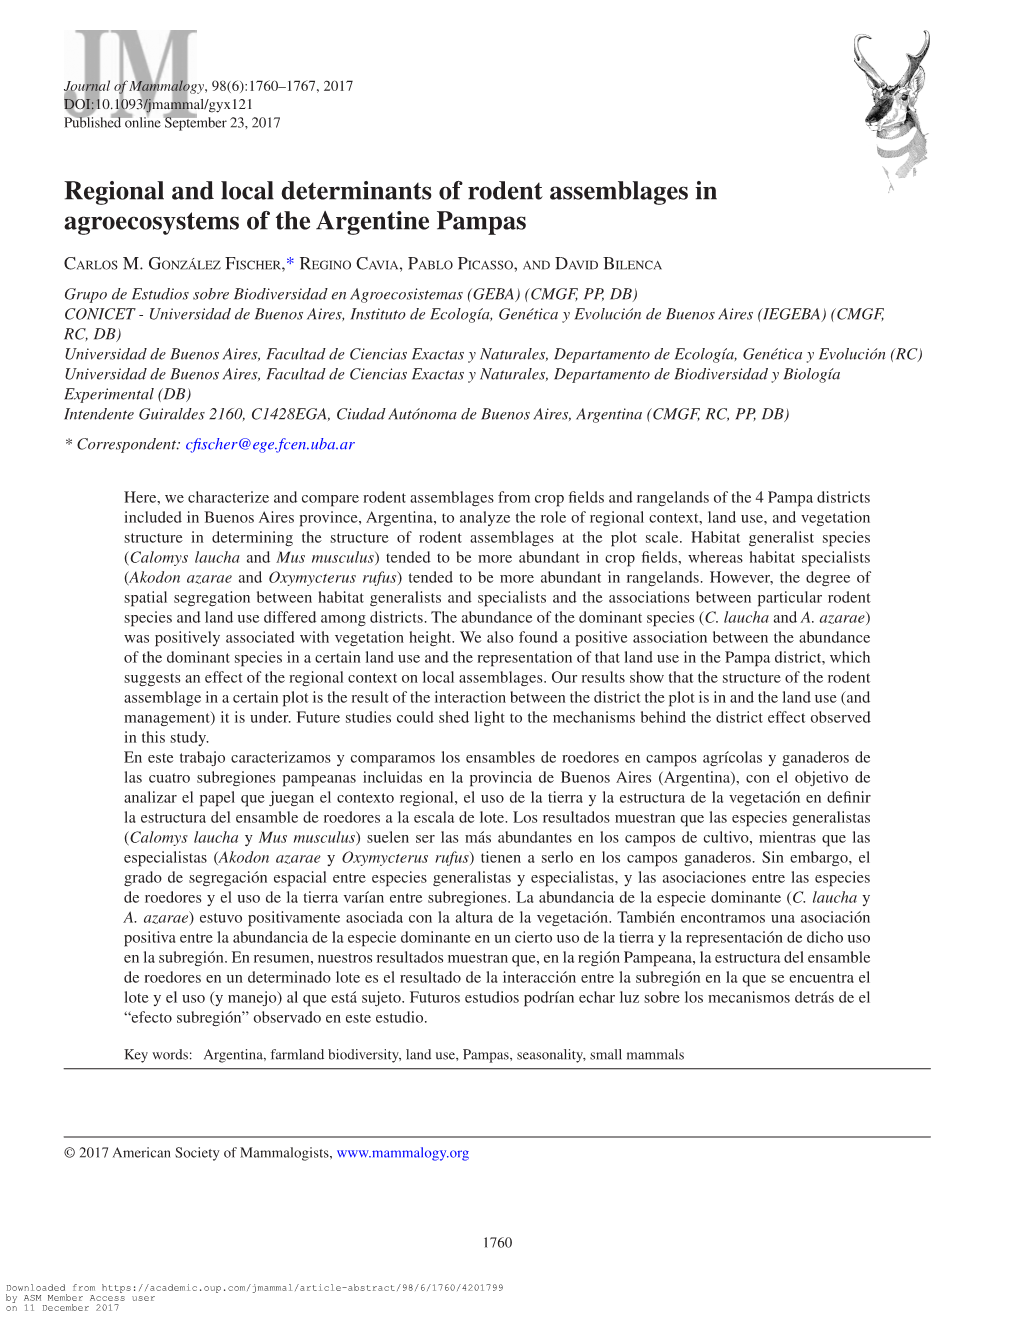 Regional and Local Determinants of Rodent Assemblages in Agroecosystems of the Argentine Pampas